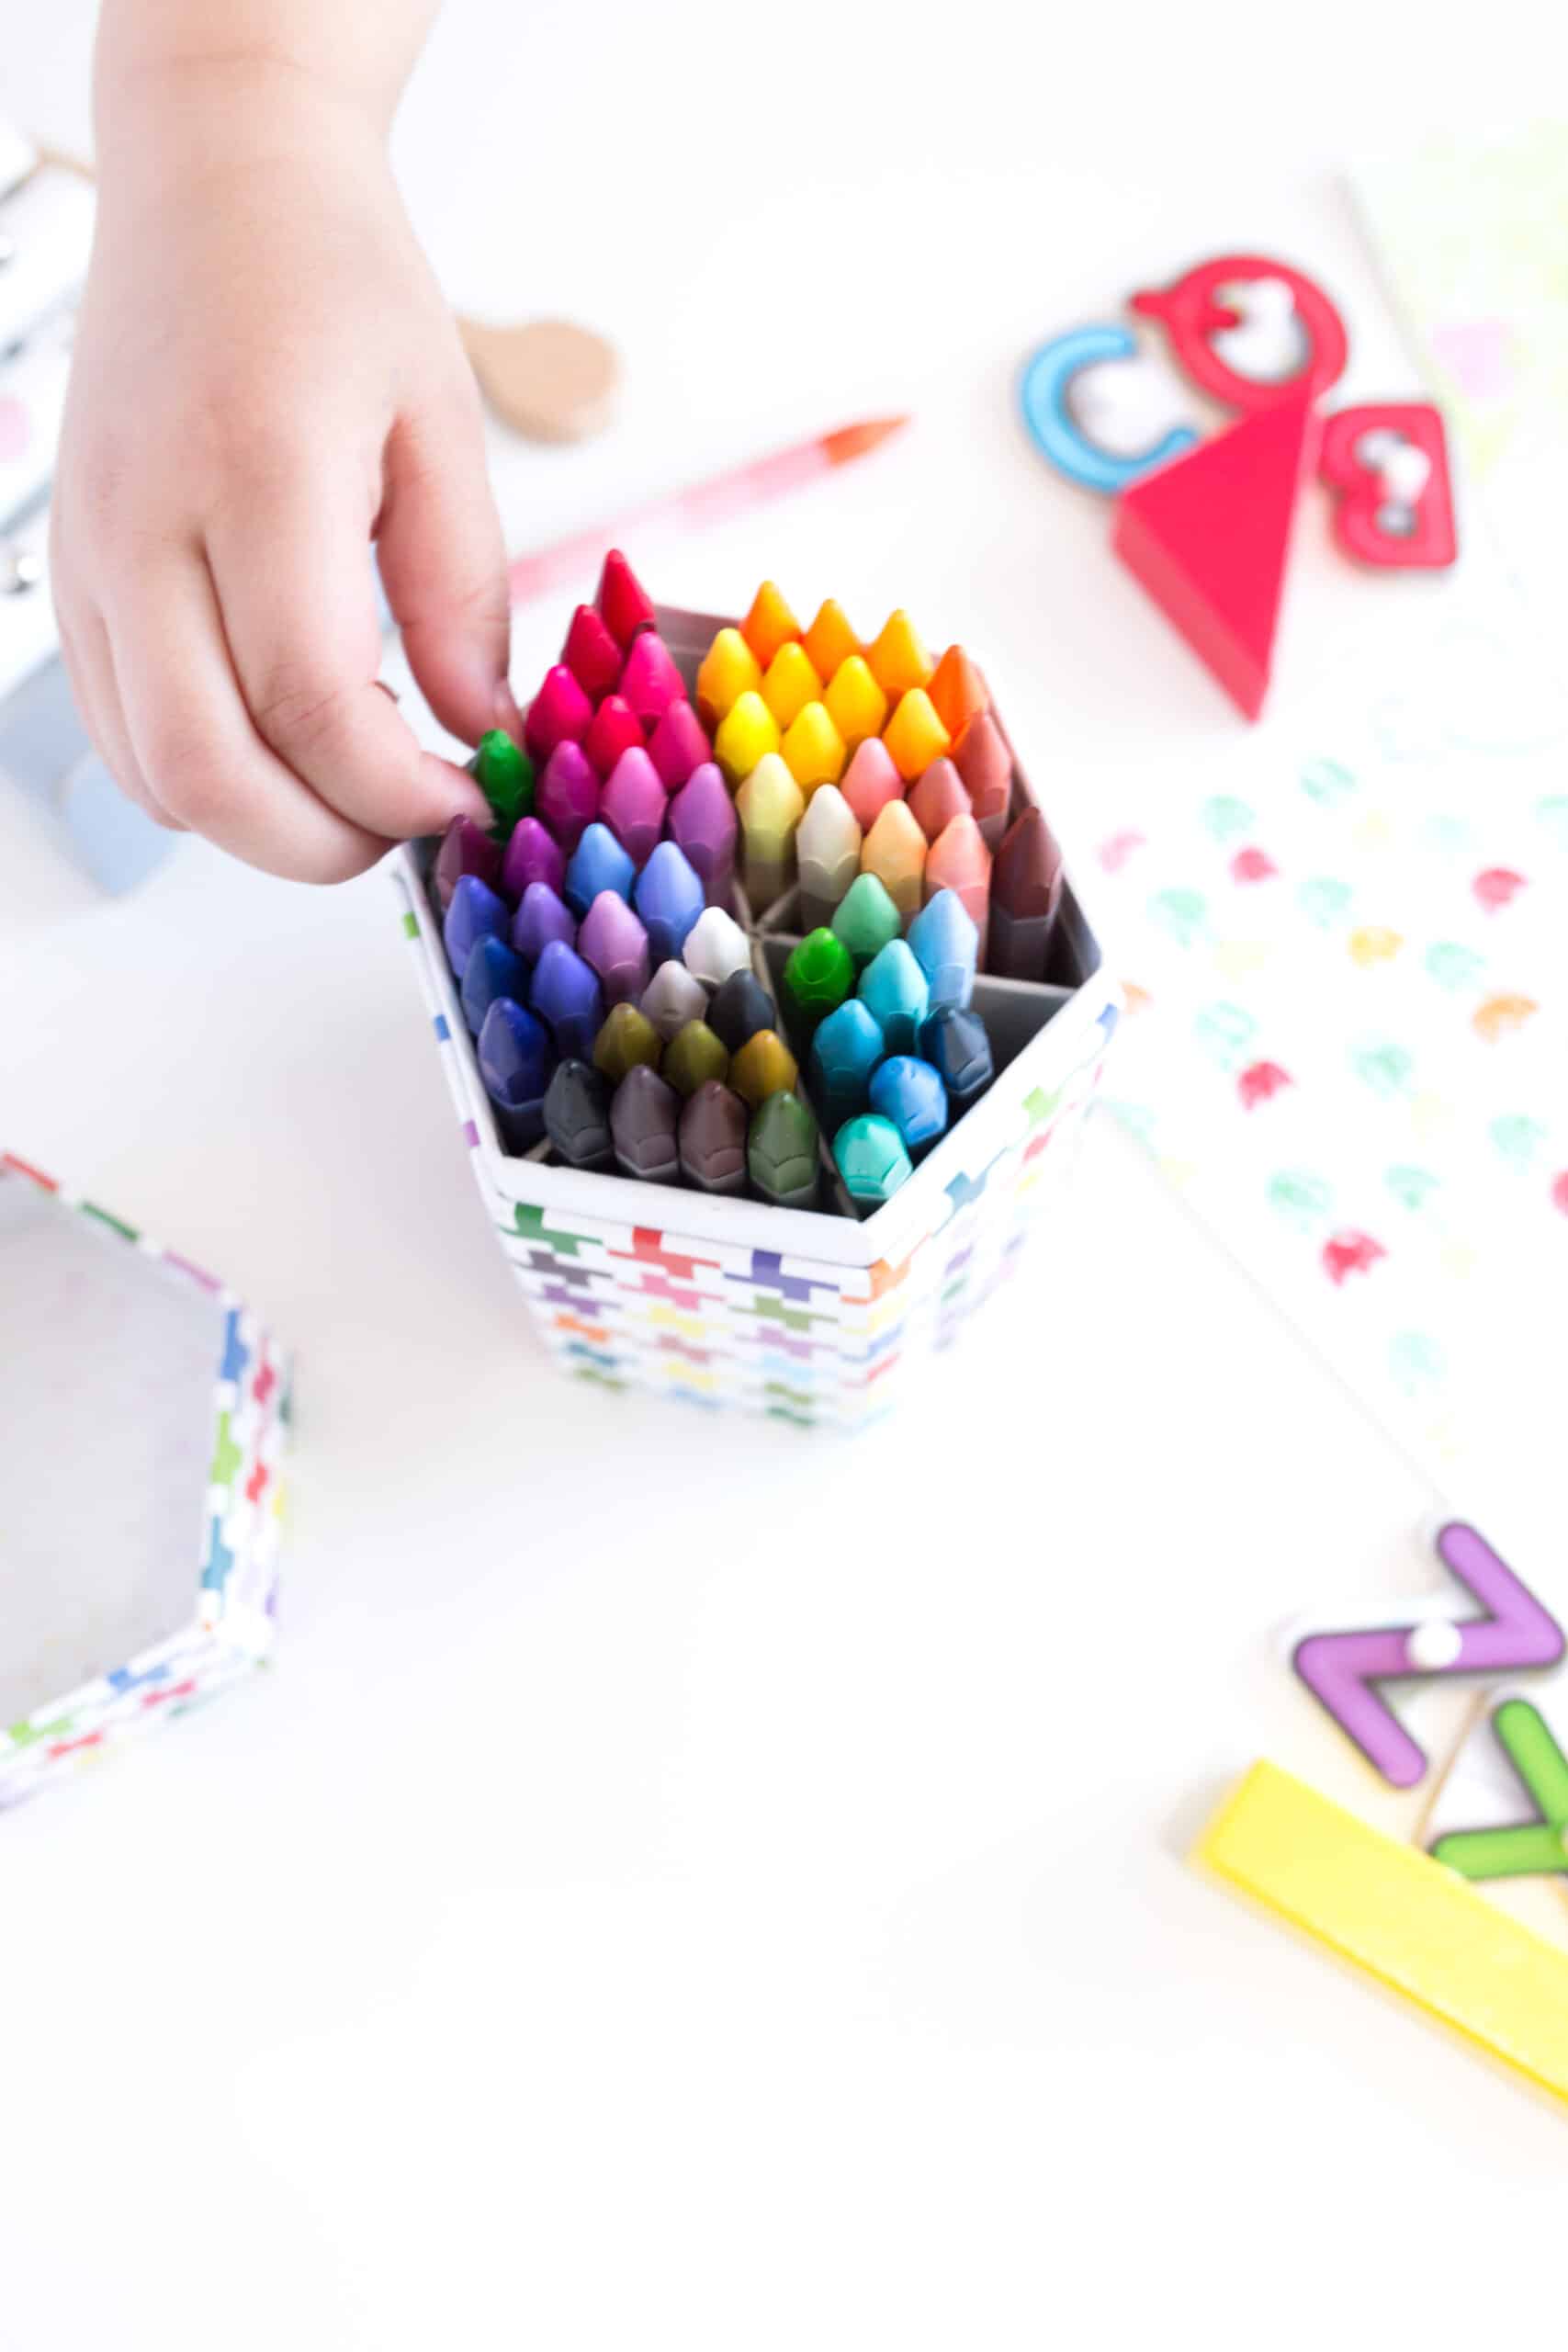 non descript child's hand reaching for a crayon in a bin. Several crafts also on the table